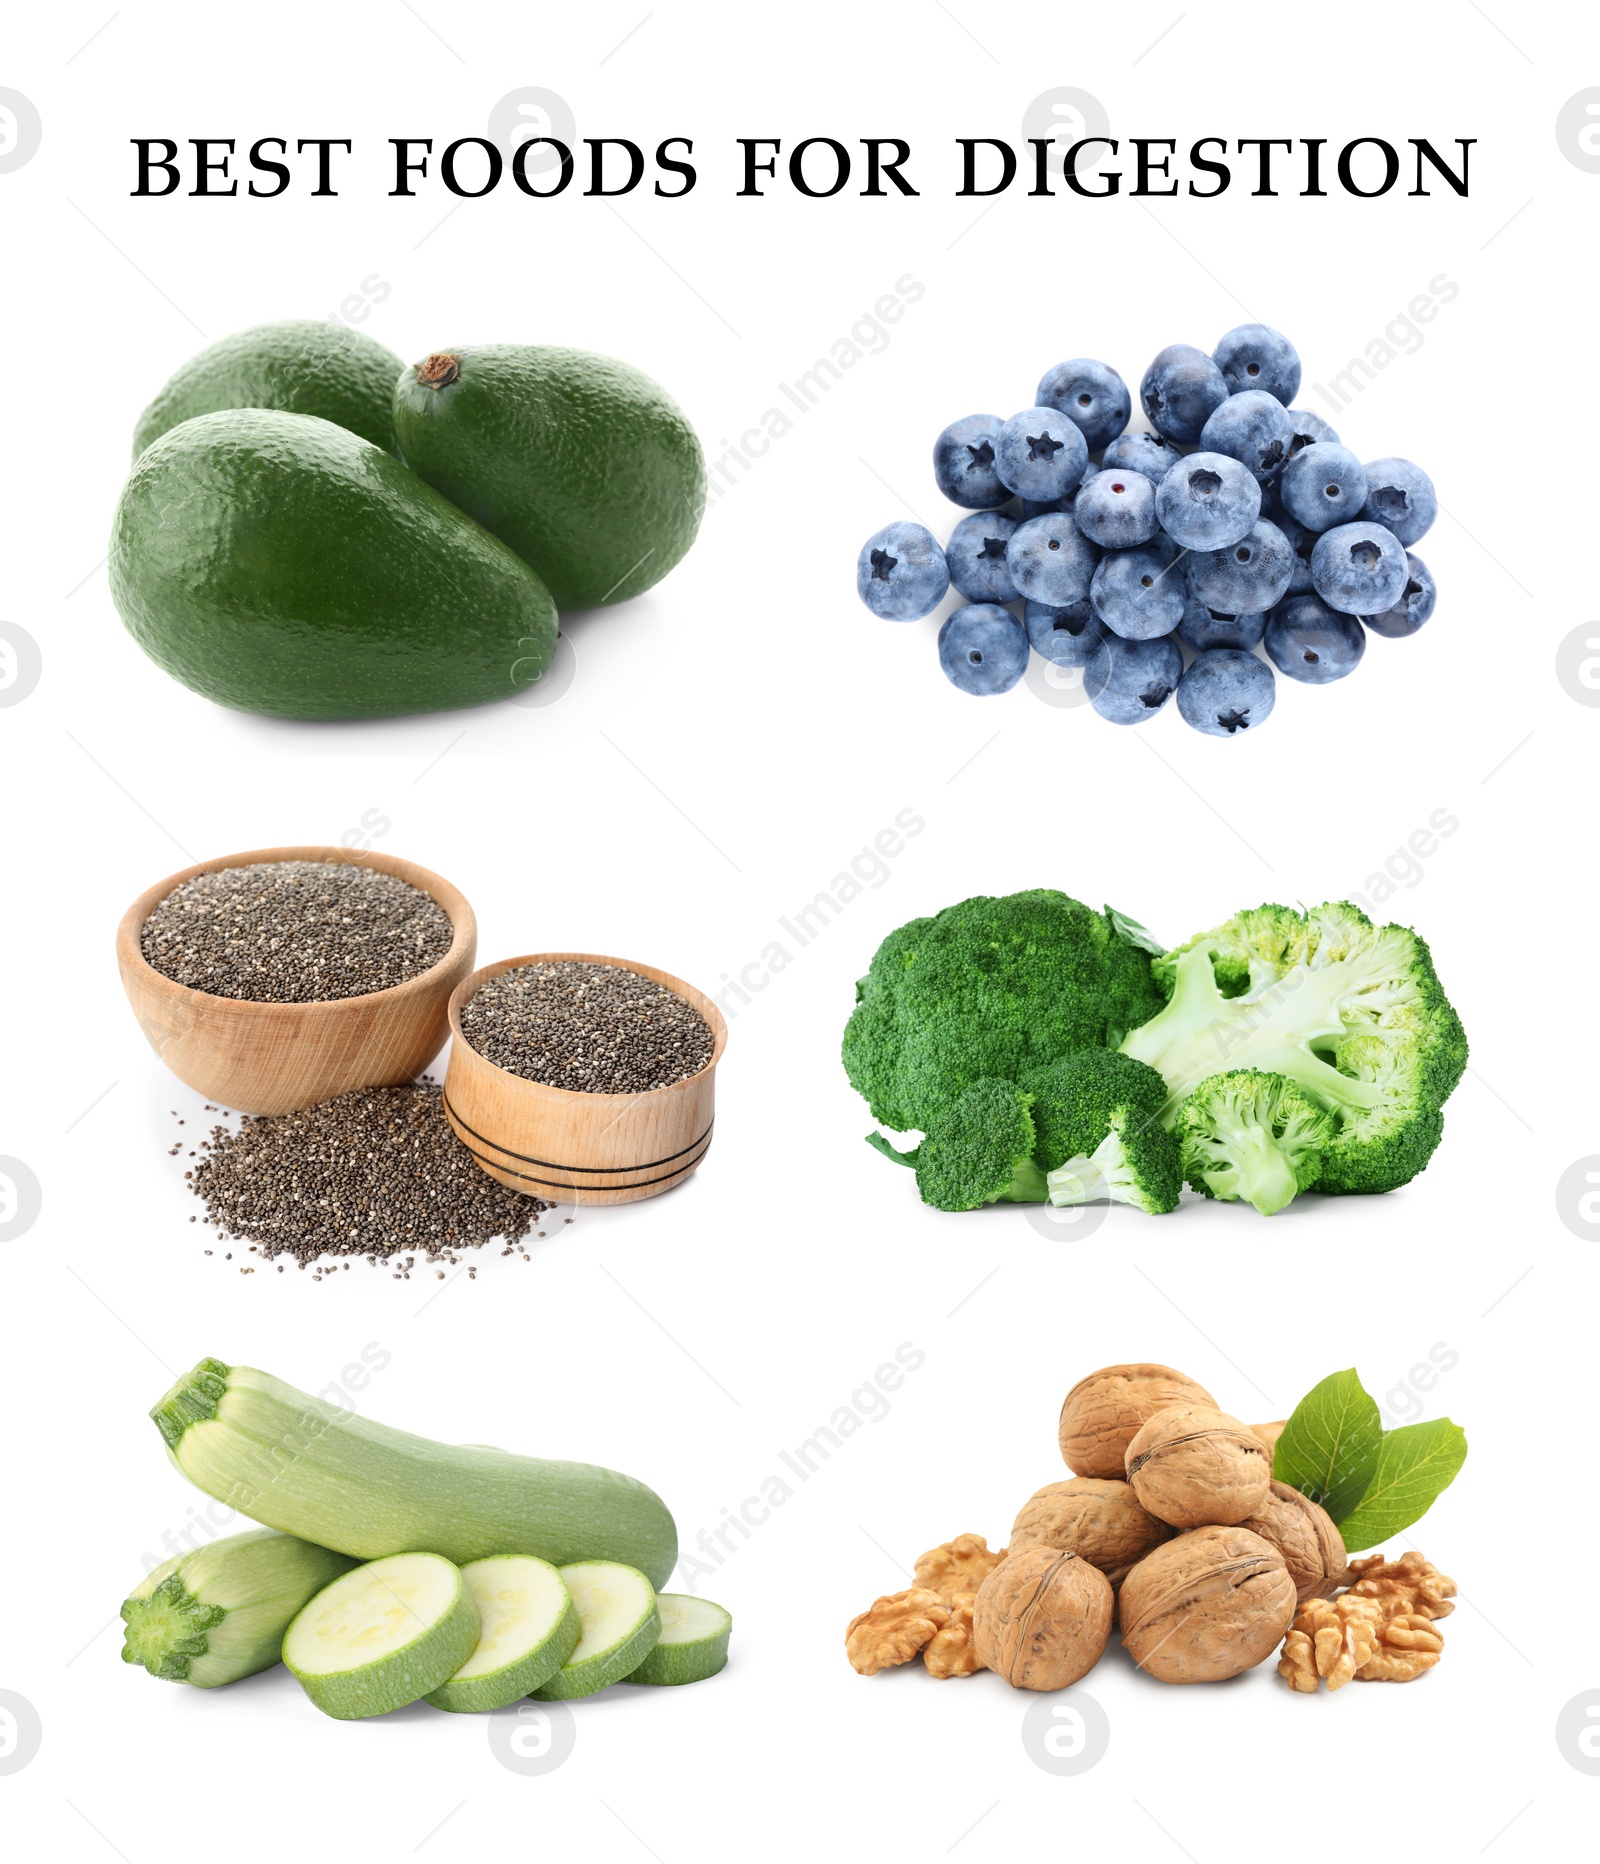 Image of Foods for healthy digestion, collage. Avocado, blueberries, chia seeds, broccoli, zucchinis and walnuts on white background